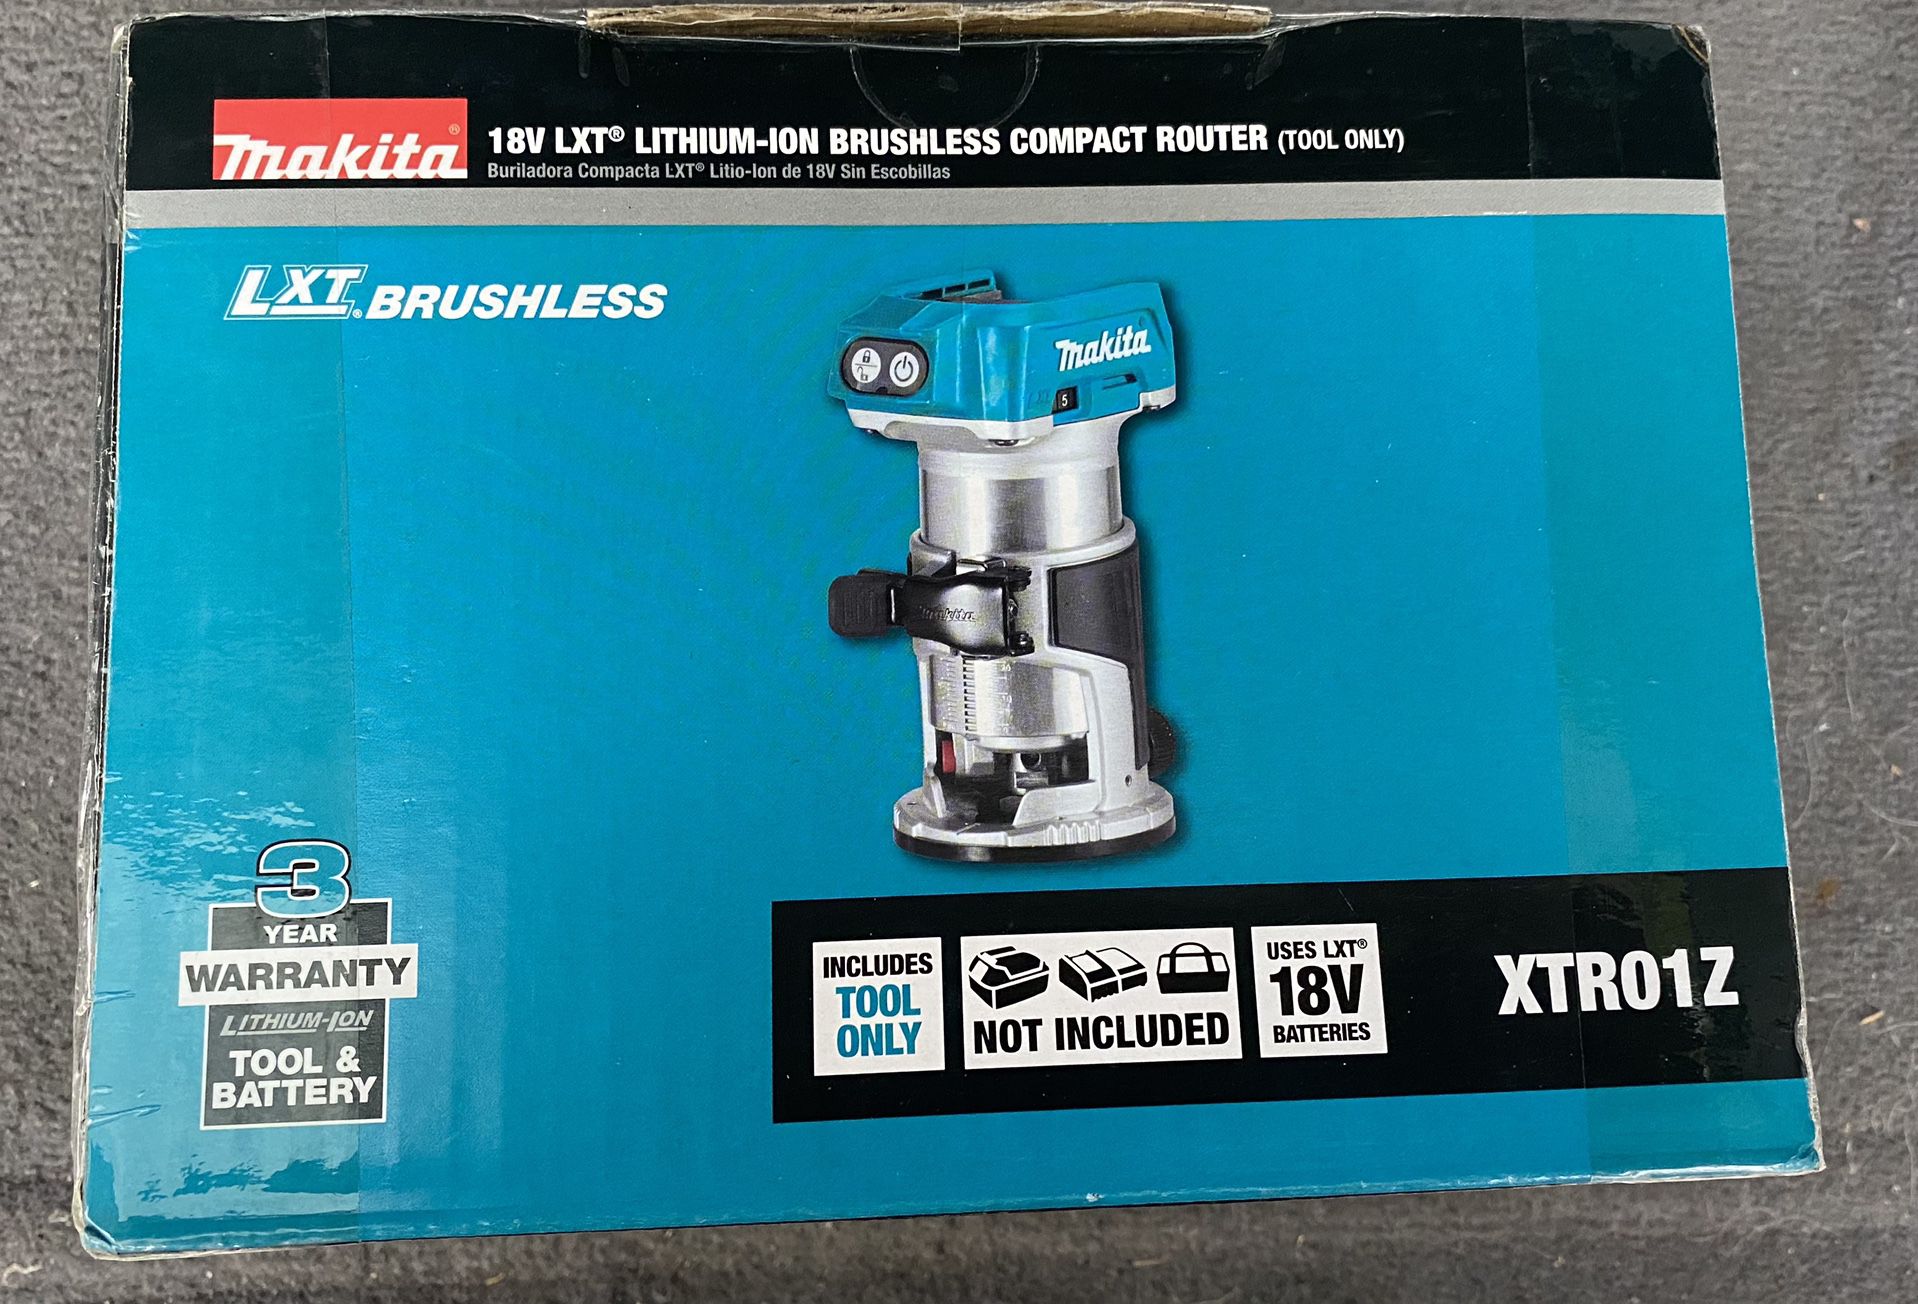 18-Volt LXT Lithium-Ion Brushless Cordless Variable Speed Compact Router with Built-in LED Light 